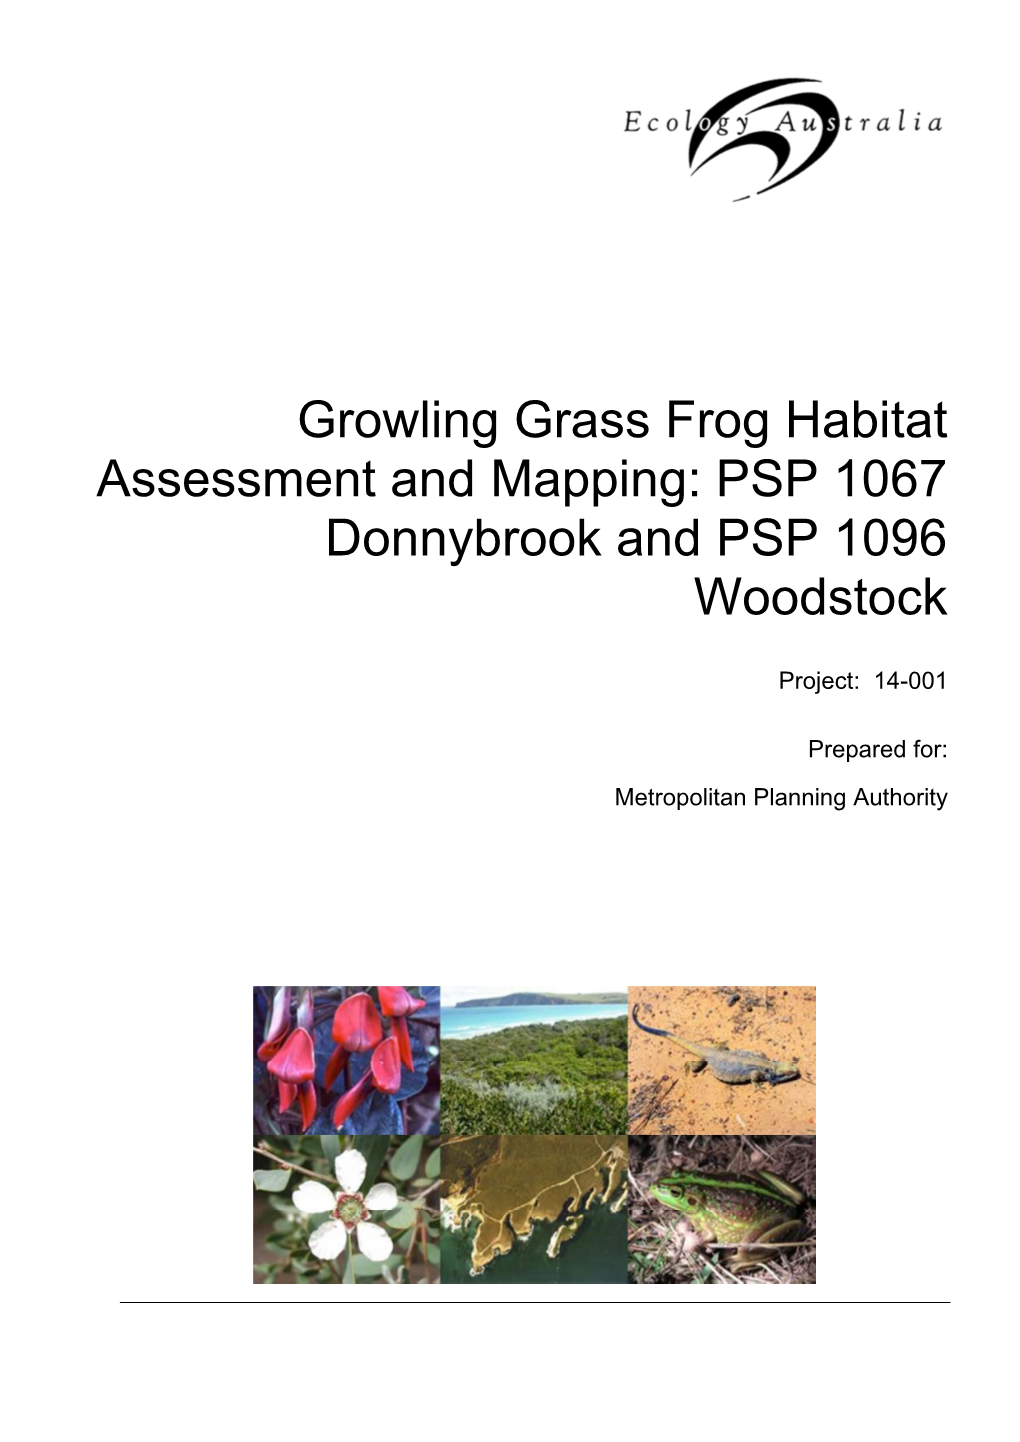 Growling Grass Frog Habitat Assessment and Mapping: PSP 1067 Donnybrook and PSP 1096 Woodstock